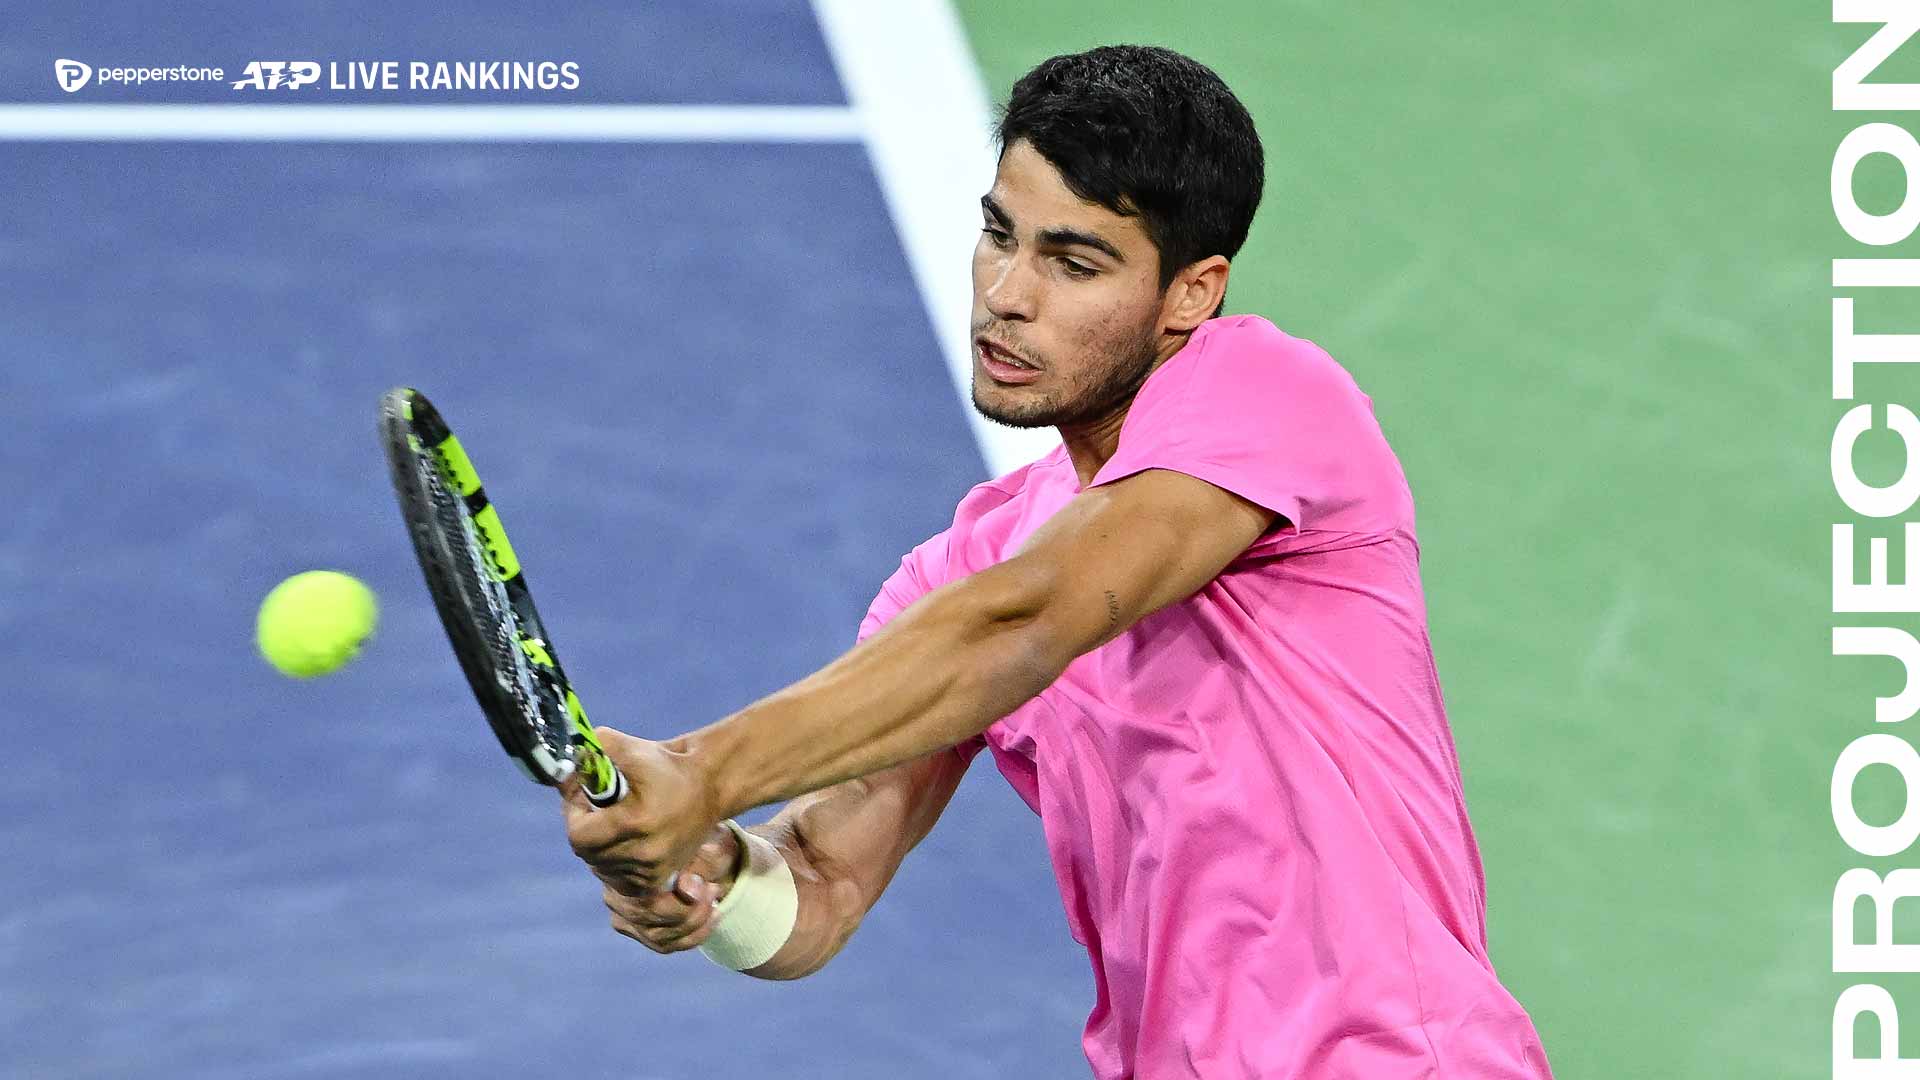 Carlos Alcaraz can return to World No. 1 in the Pepperstone ATP Rankings by winning the Indian Wells title.